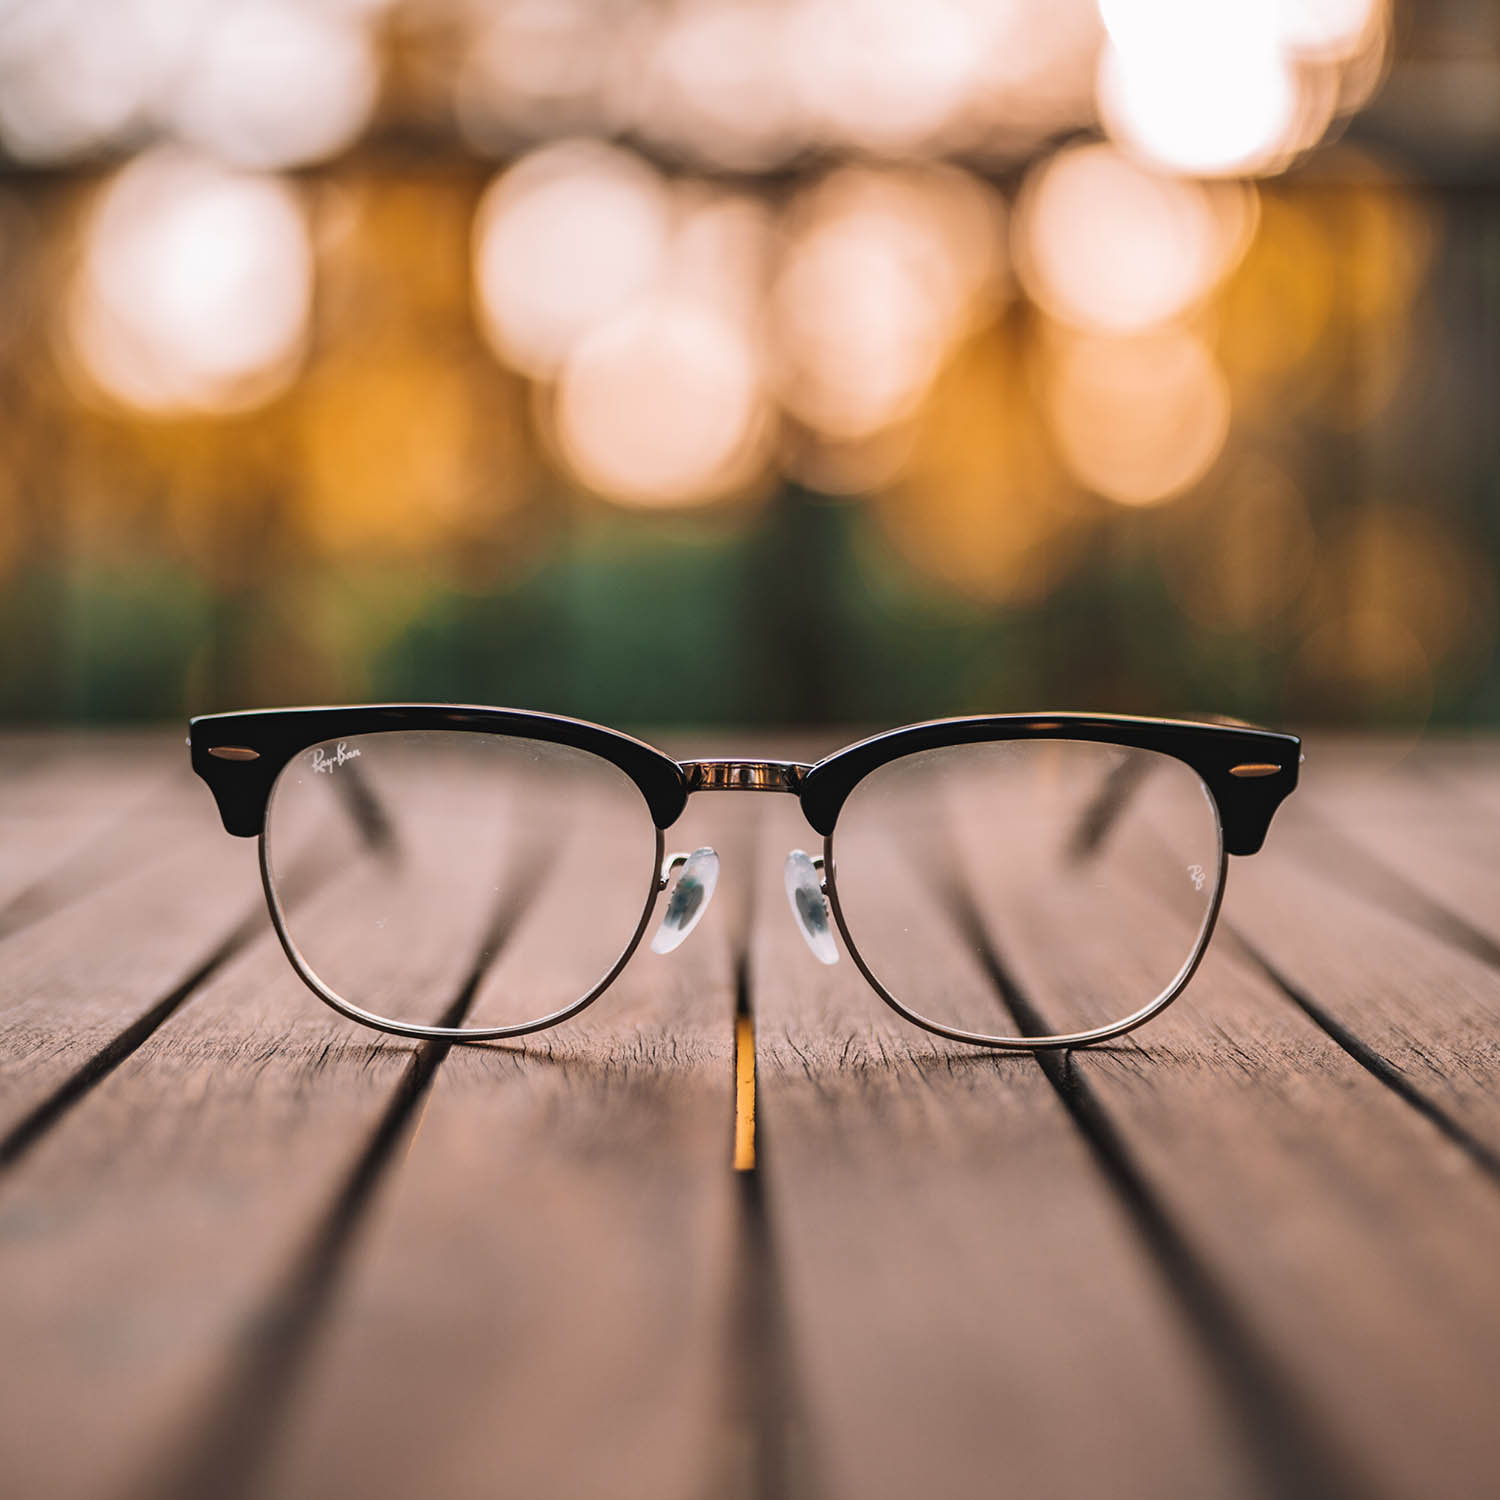 Image of a pair of glasses